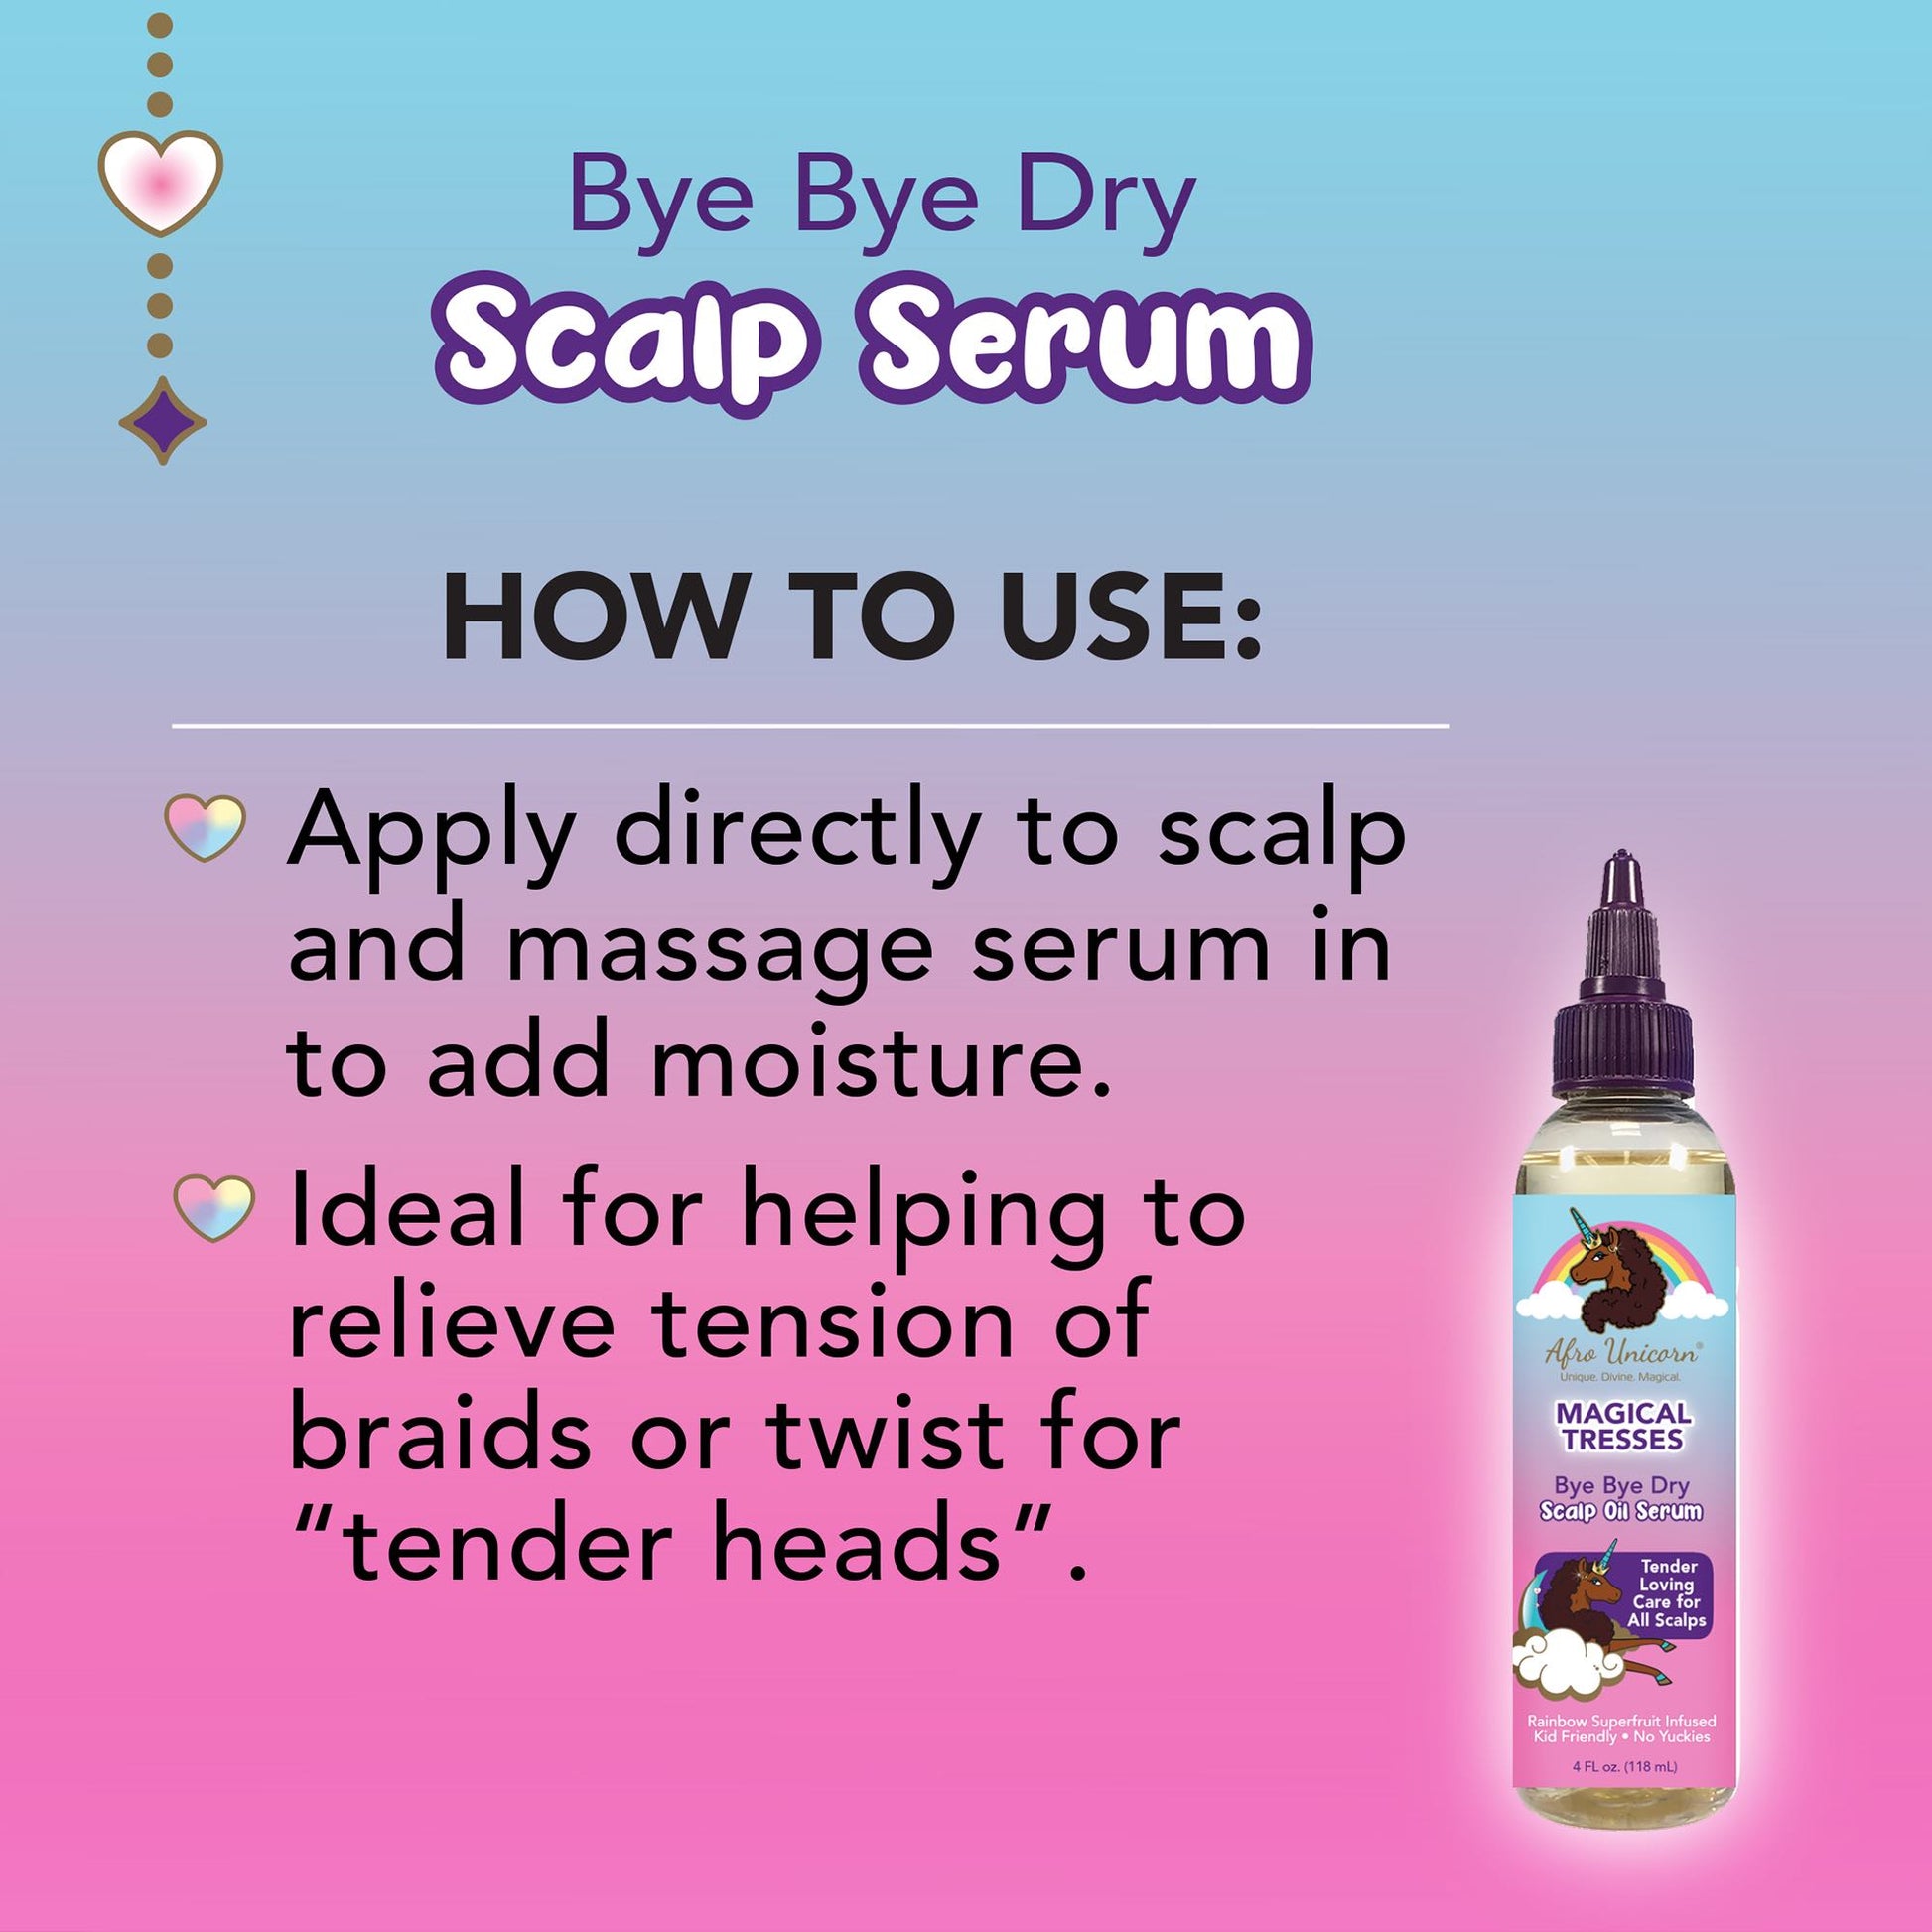 Afro Unicorn Bye Bye Dry Scalp Serum how to use label.